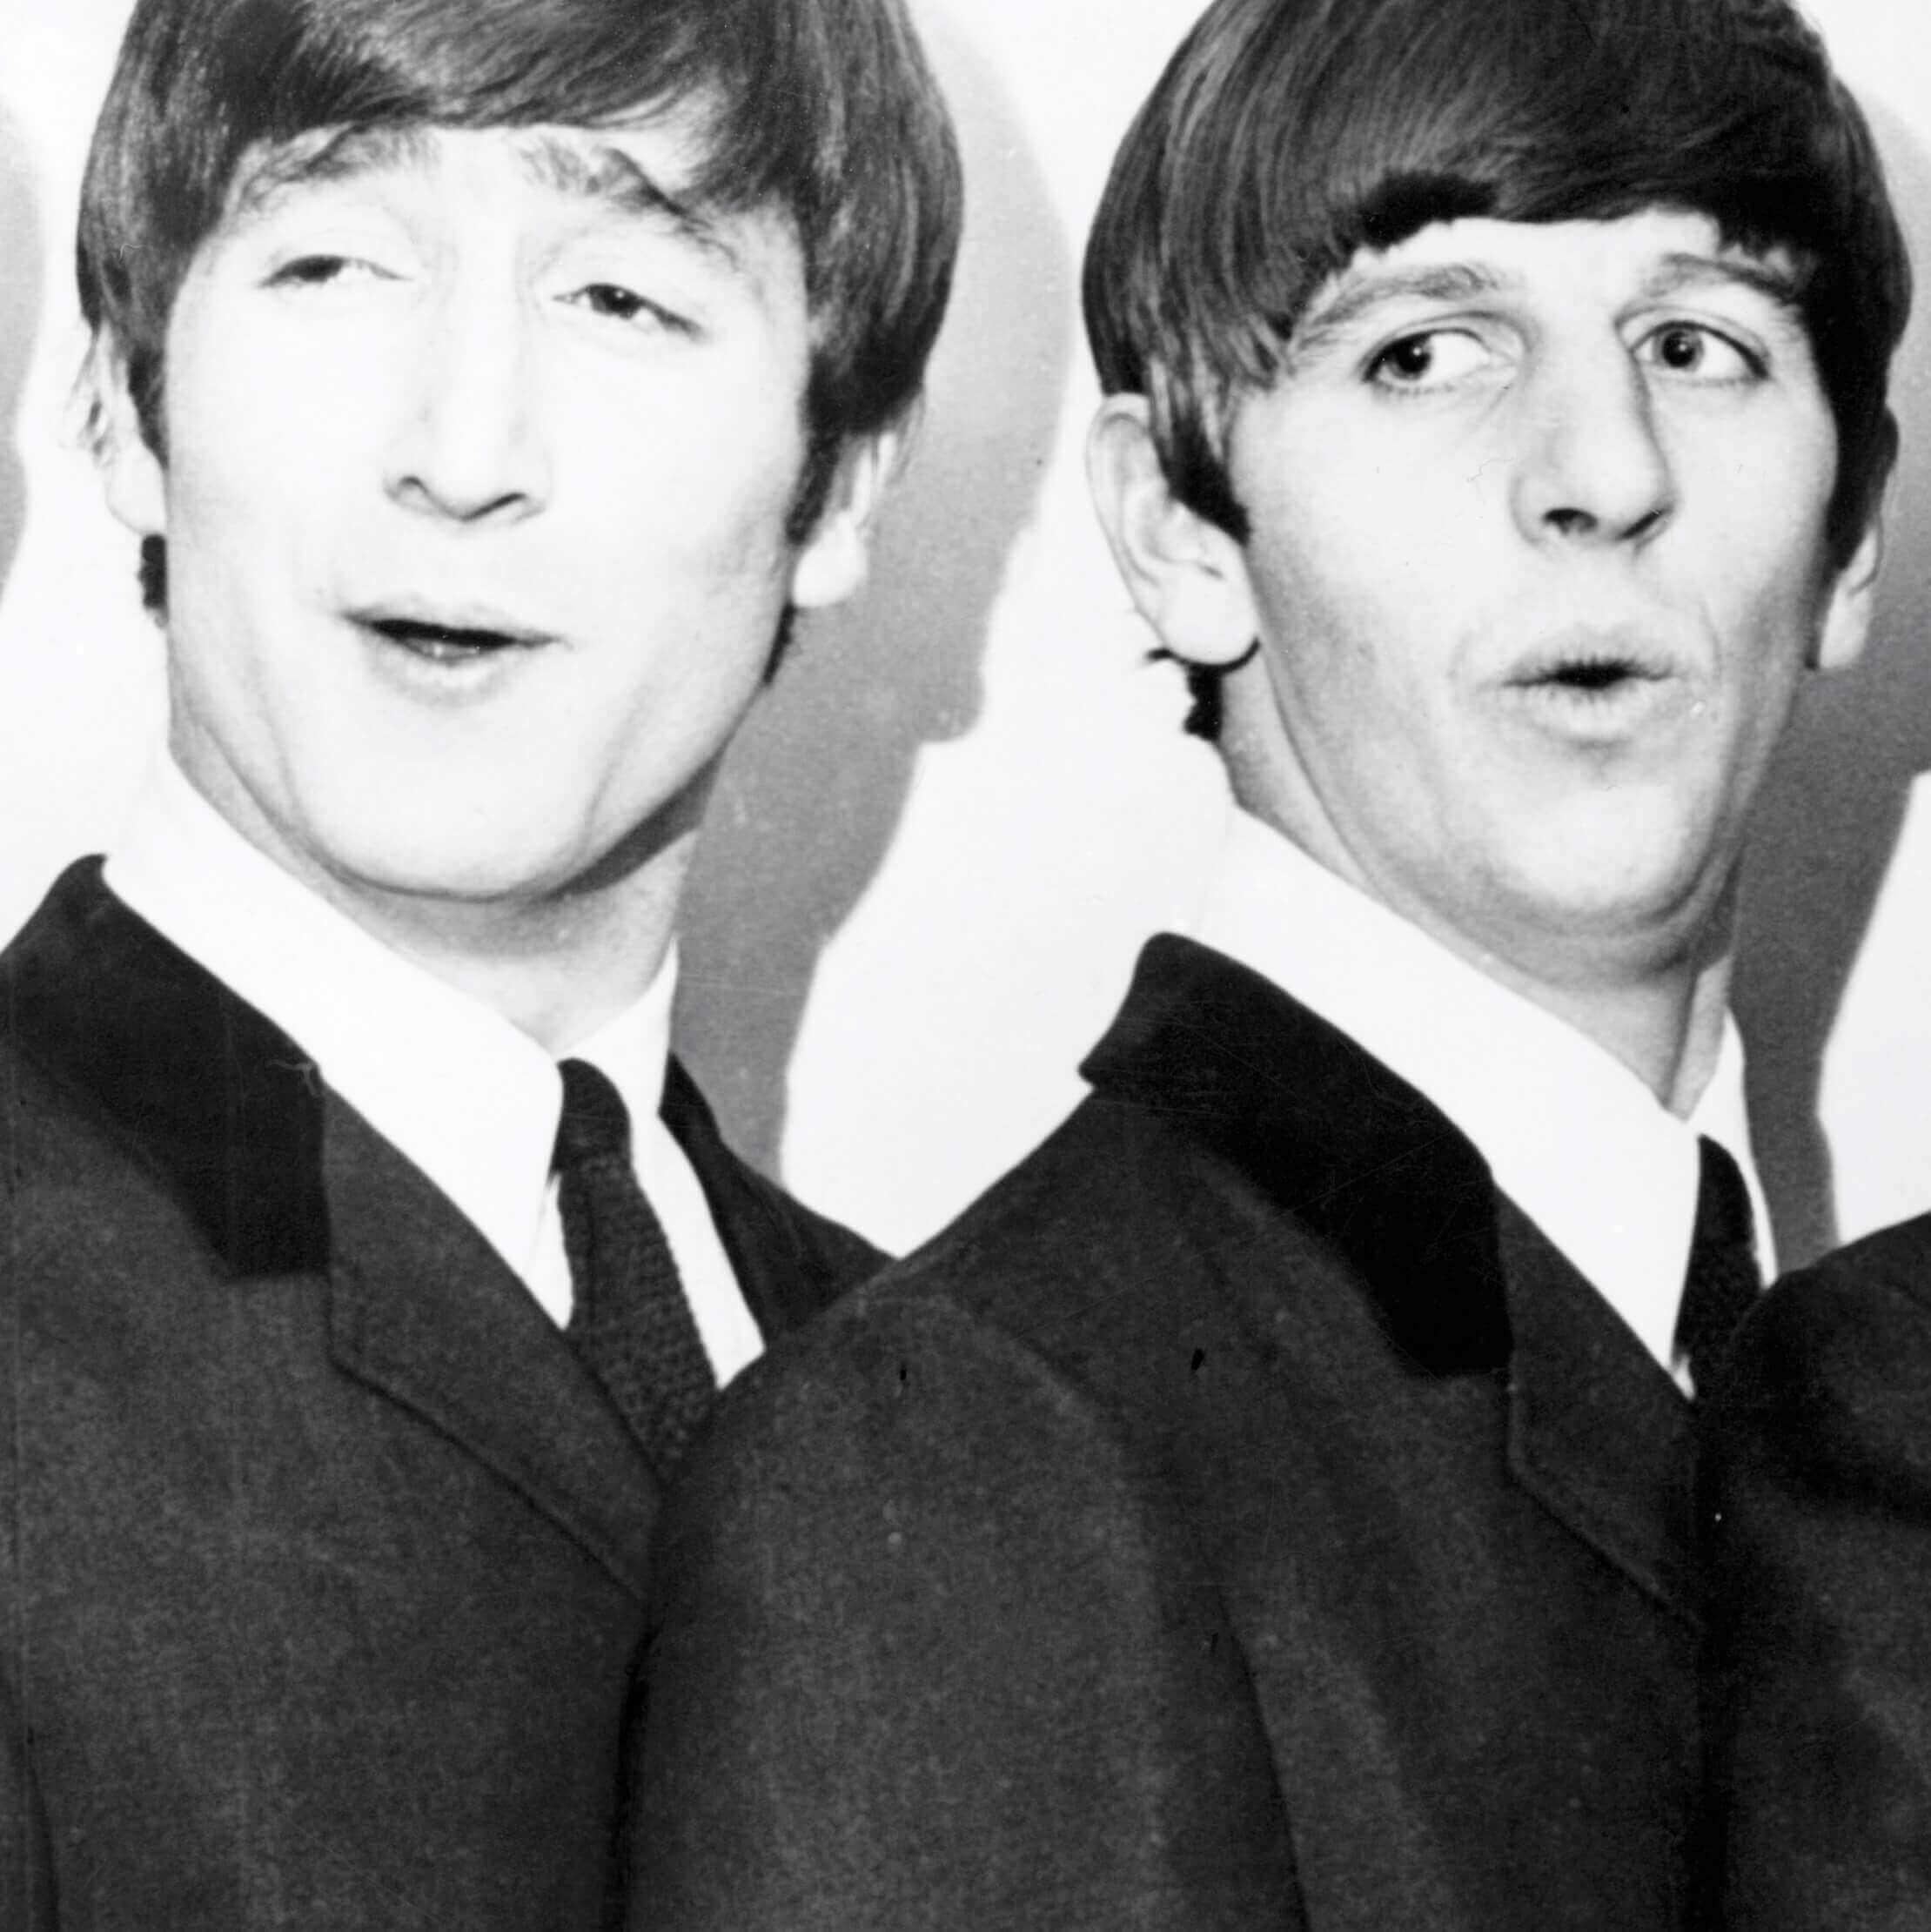 John Lennon and Ringo Starr wearing suits